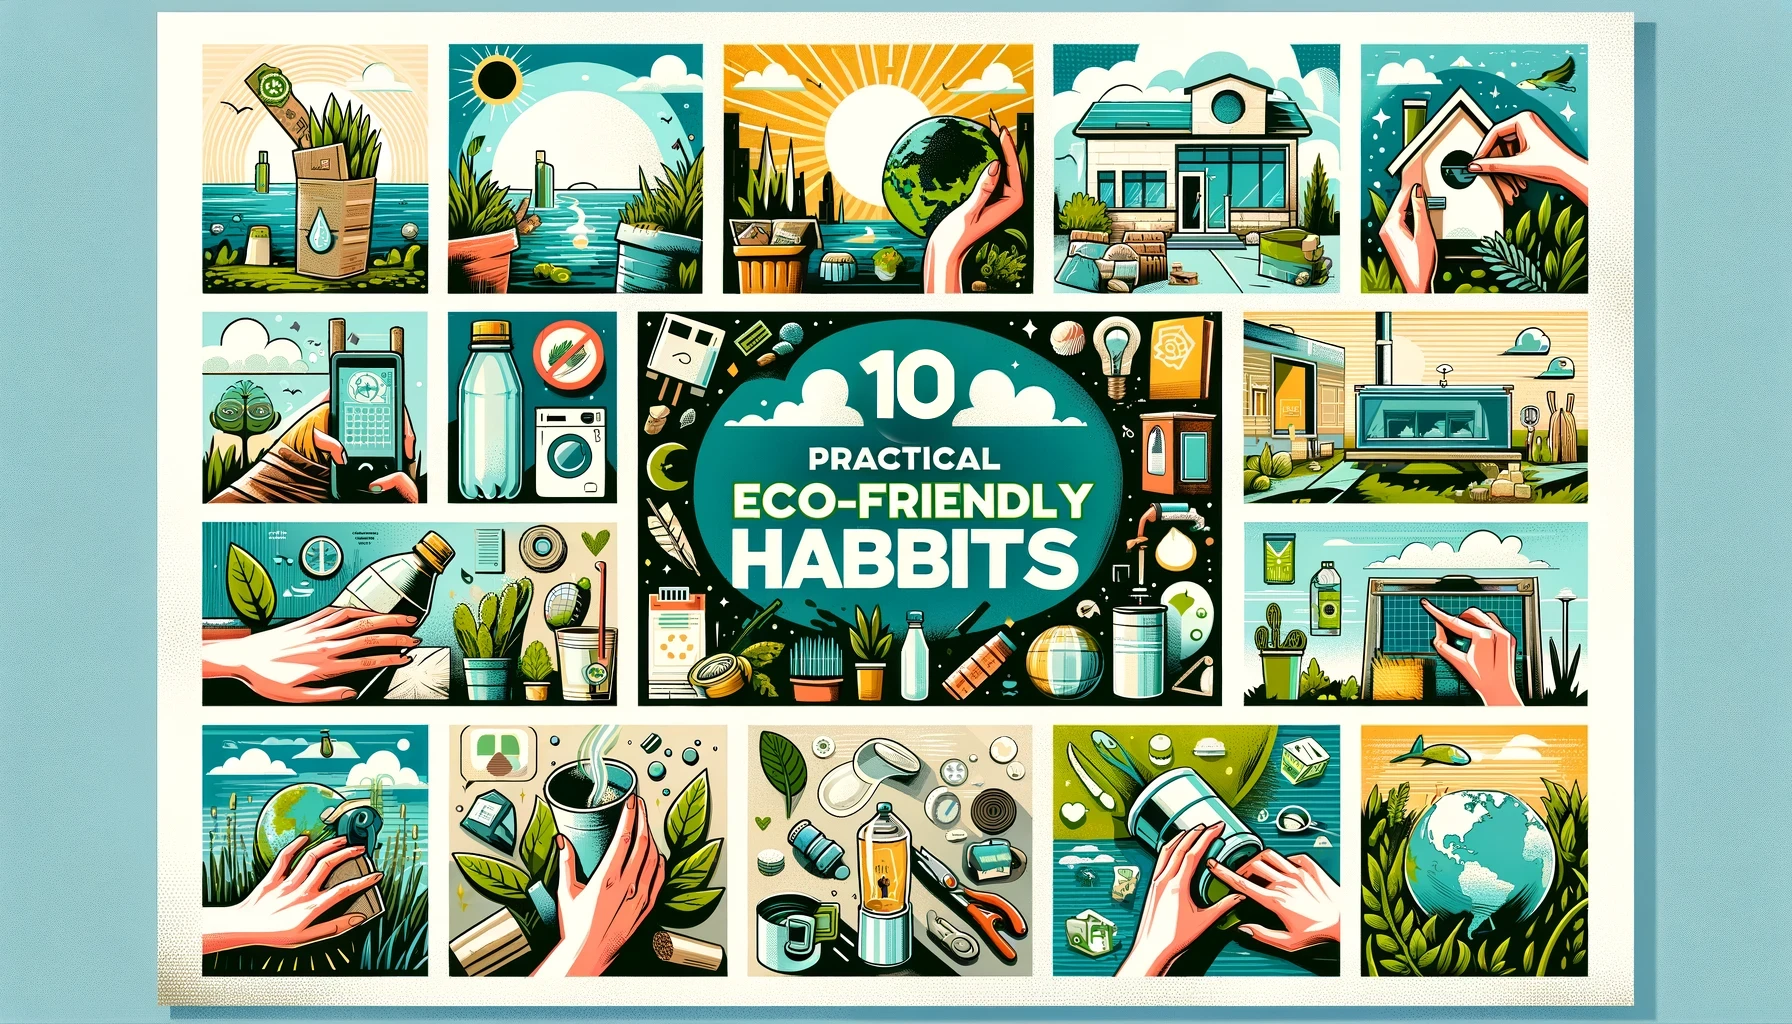 featuring the title and ten icons representing essential habits like using reusable bottles, saving energy, composting, and supporting local businesses, to inspire daily sustainable living.